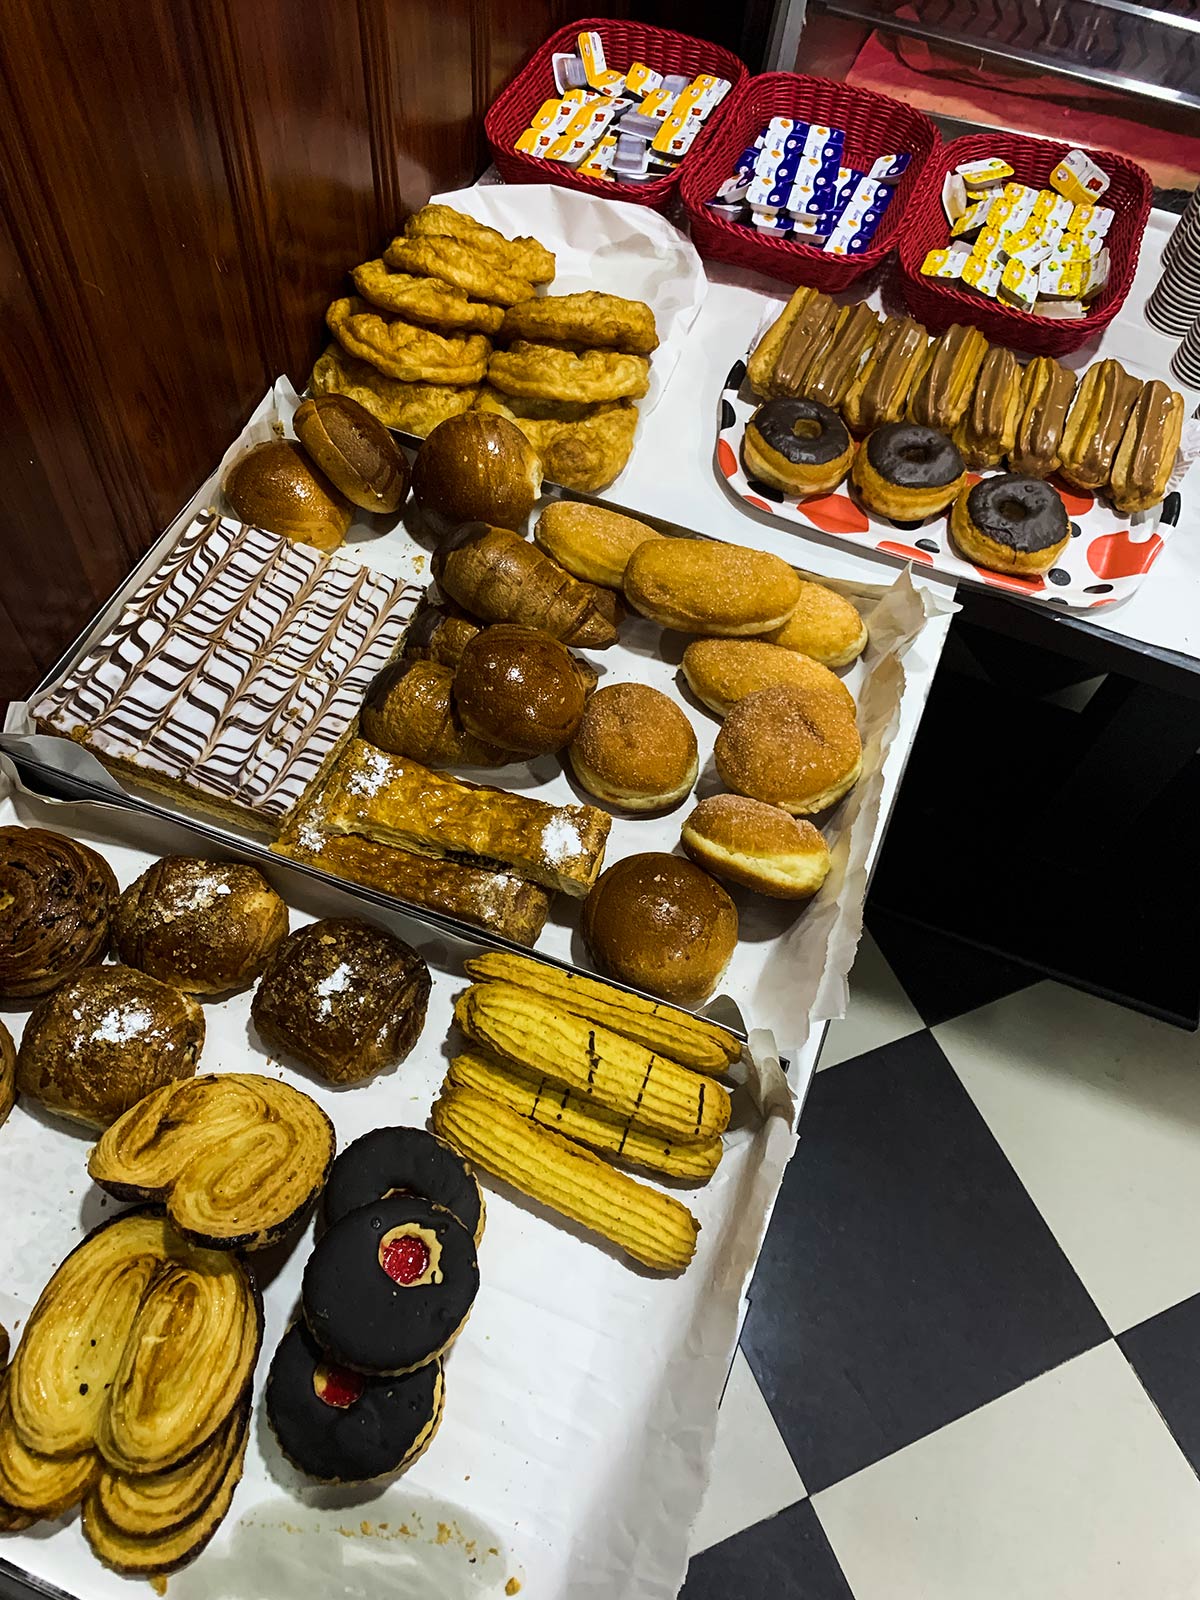 Bread and pastries in Algiers, Algeria. 5 hours in an Algerian police station